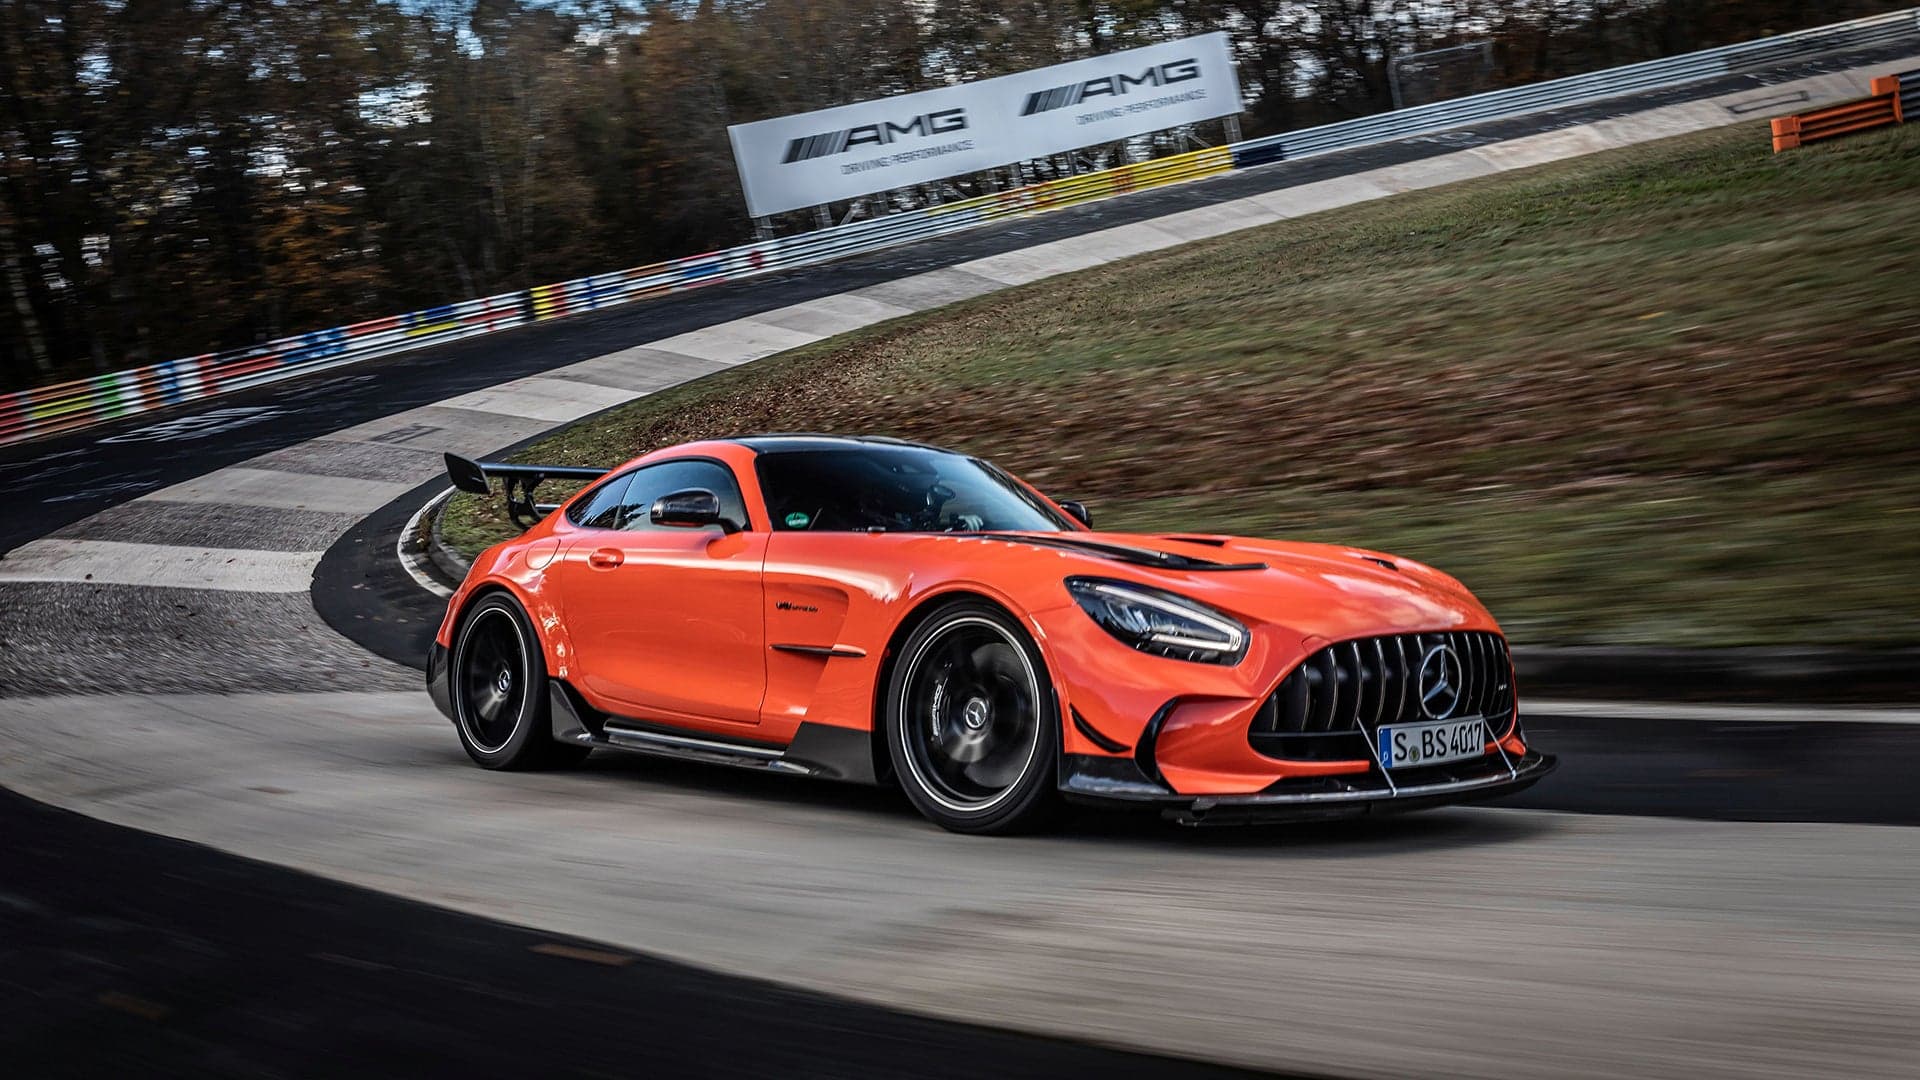 How the 2021 Mercedes-AMG GT Black Series Broke the Nurburgring Production Car Record